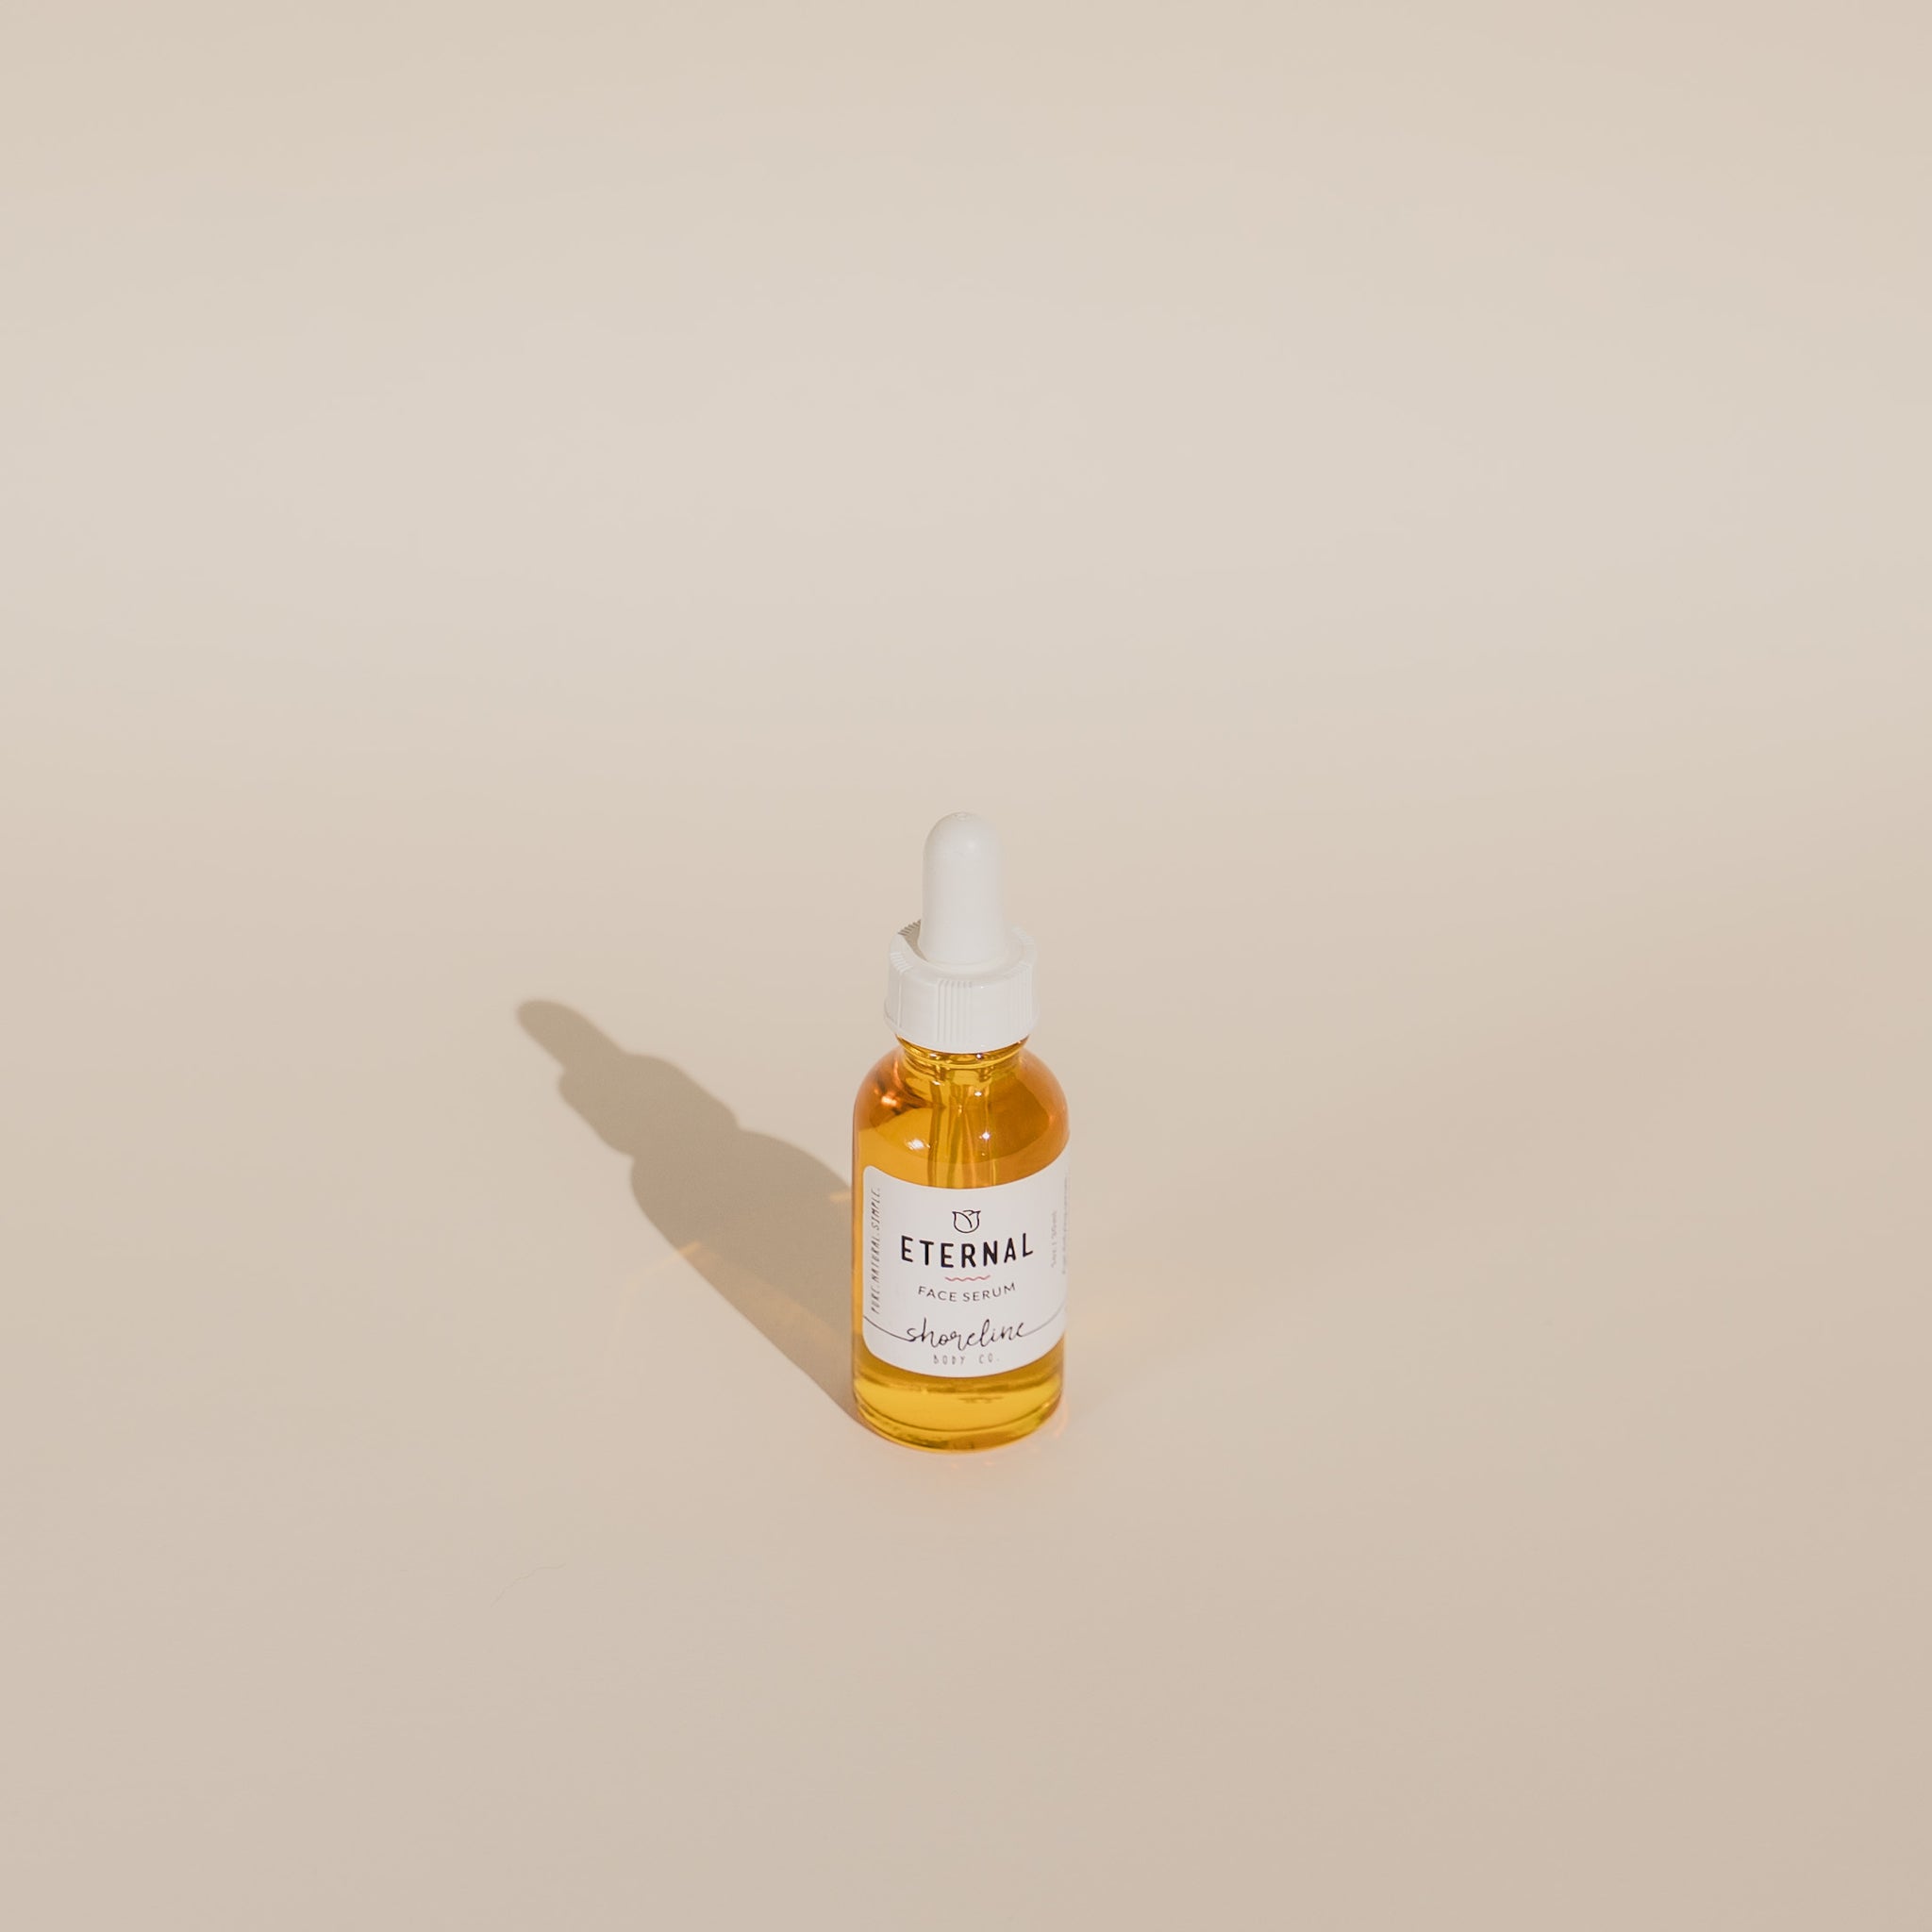 Eternal Serum is photographed against an off white background, illuminated by the sun. 